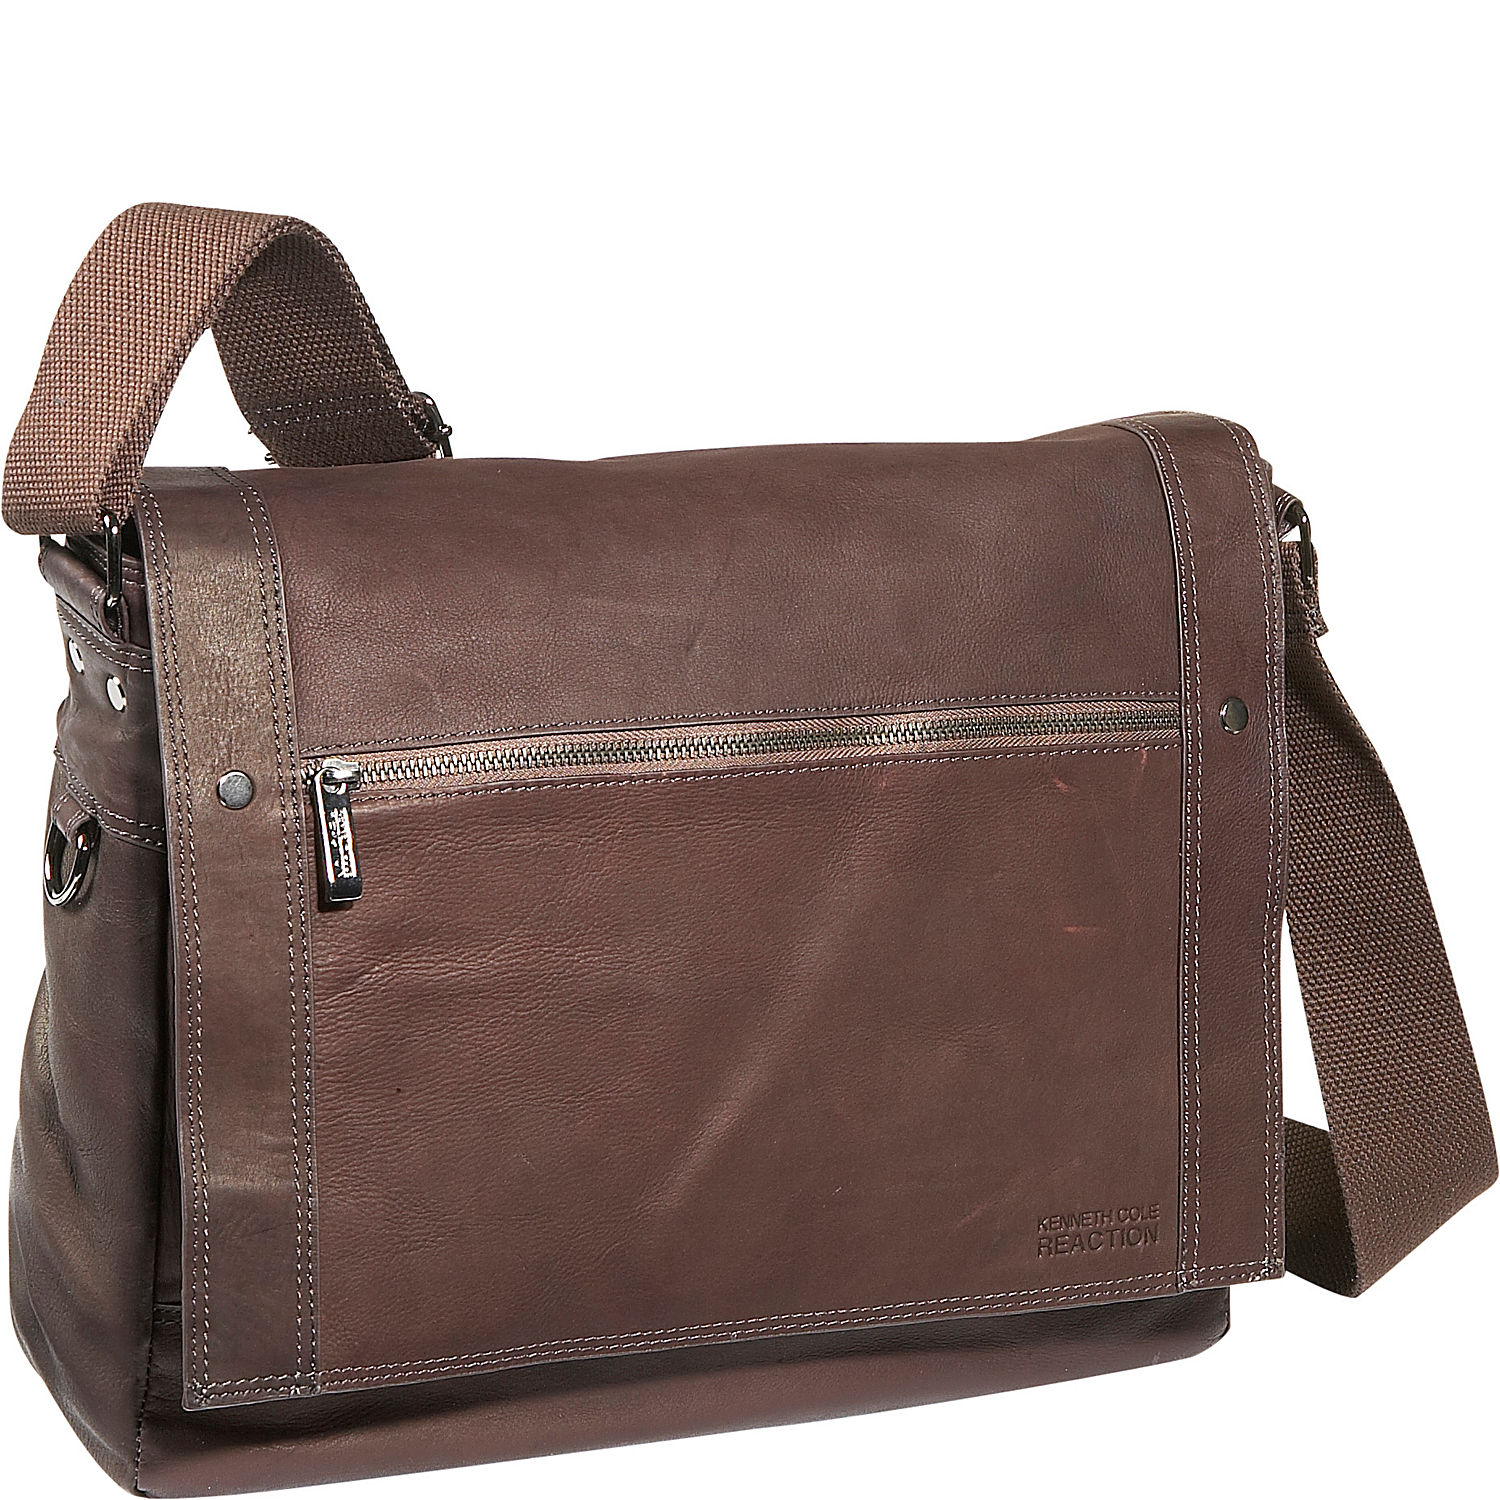 Kenneth Cole Reaction Colombian Leather Flapover Messenger Bag